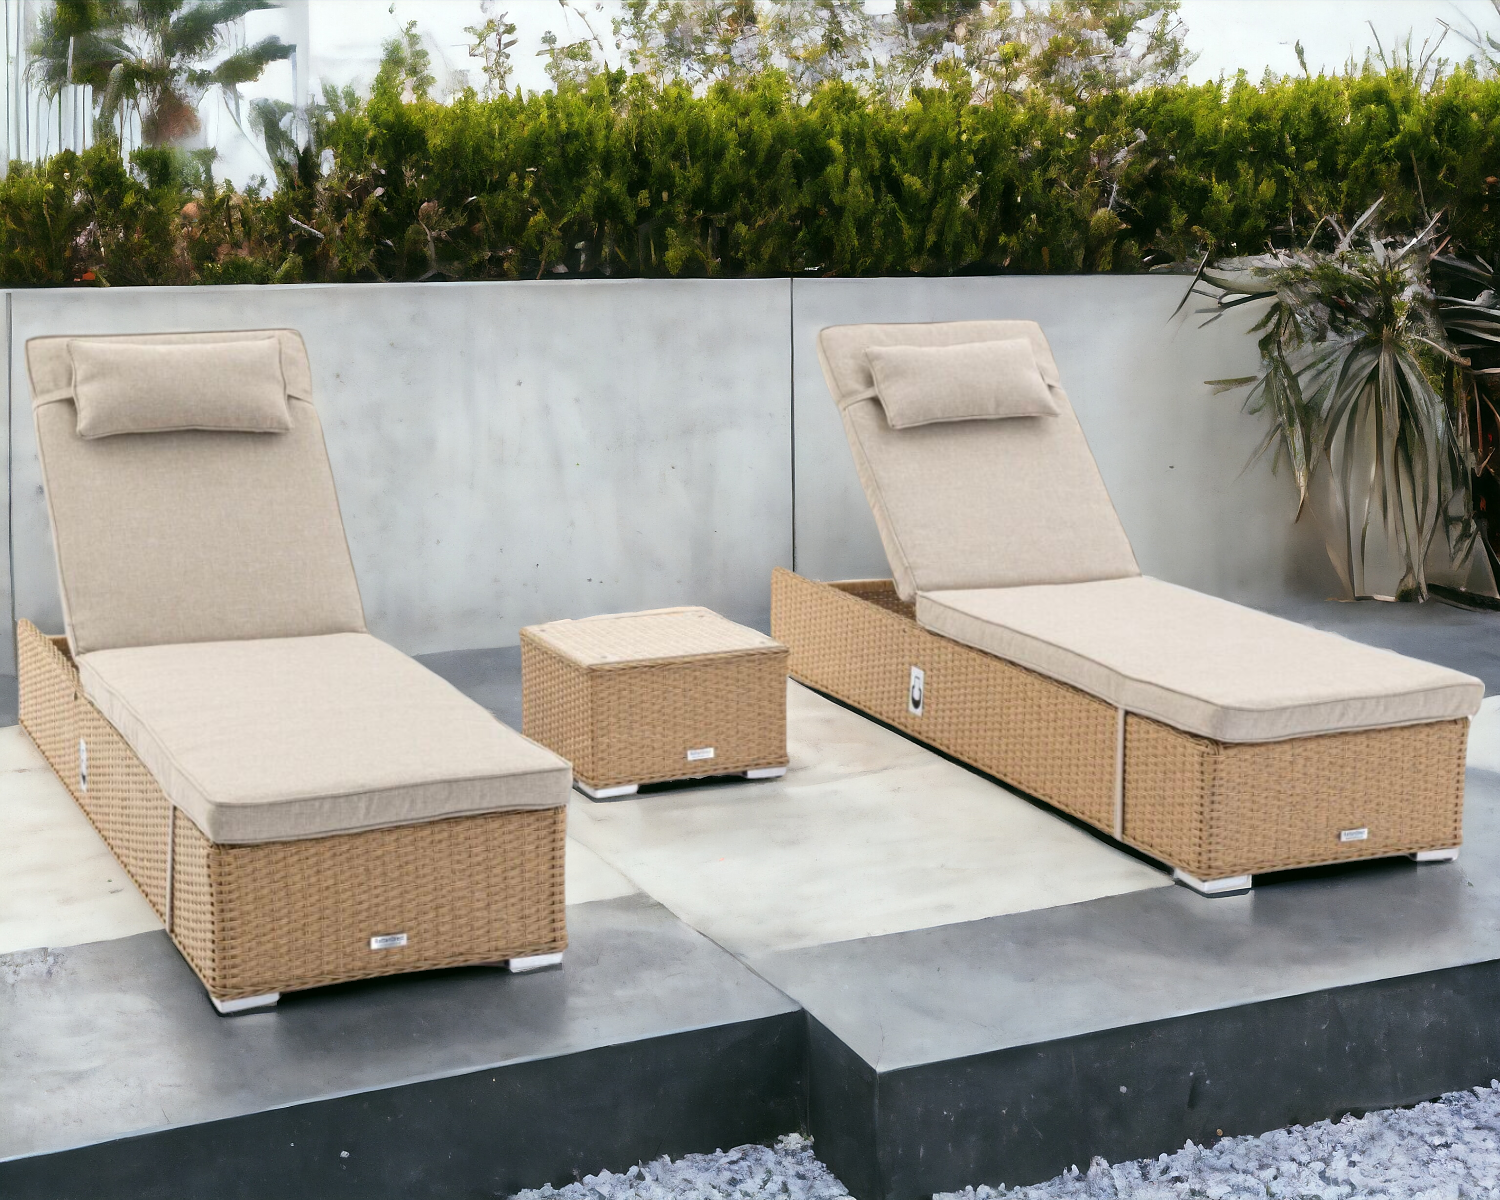 Rattan Garden Sun Lounger Set In Willow 2 Loungers 1 Table Miami Rattan Direct